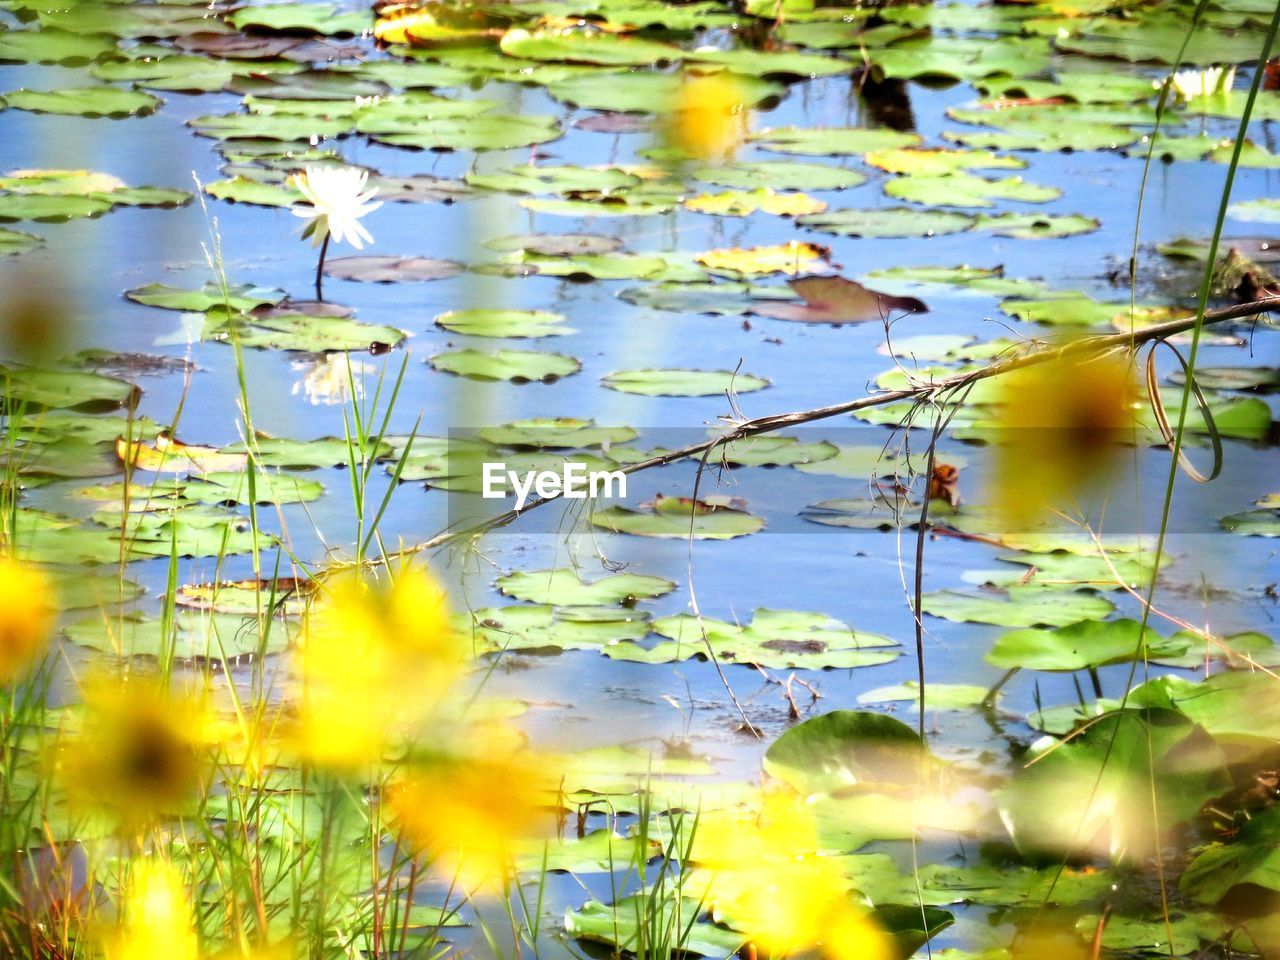 FULL FRAME SHOT OF YELLOW FLOATING ON WATER